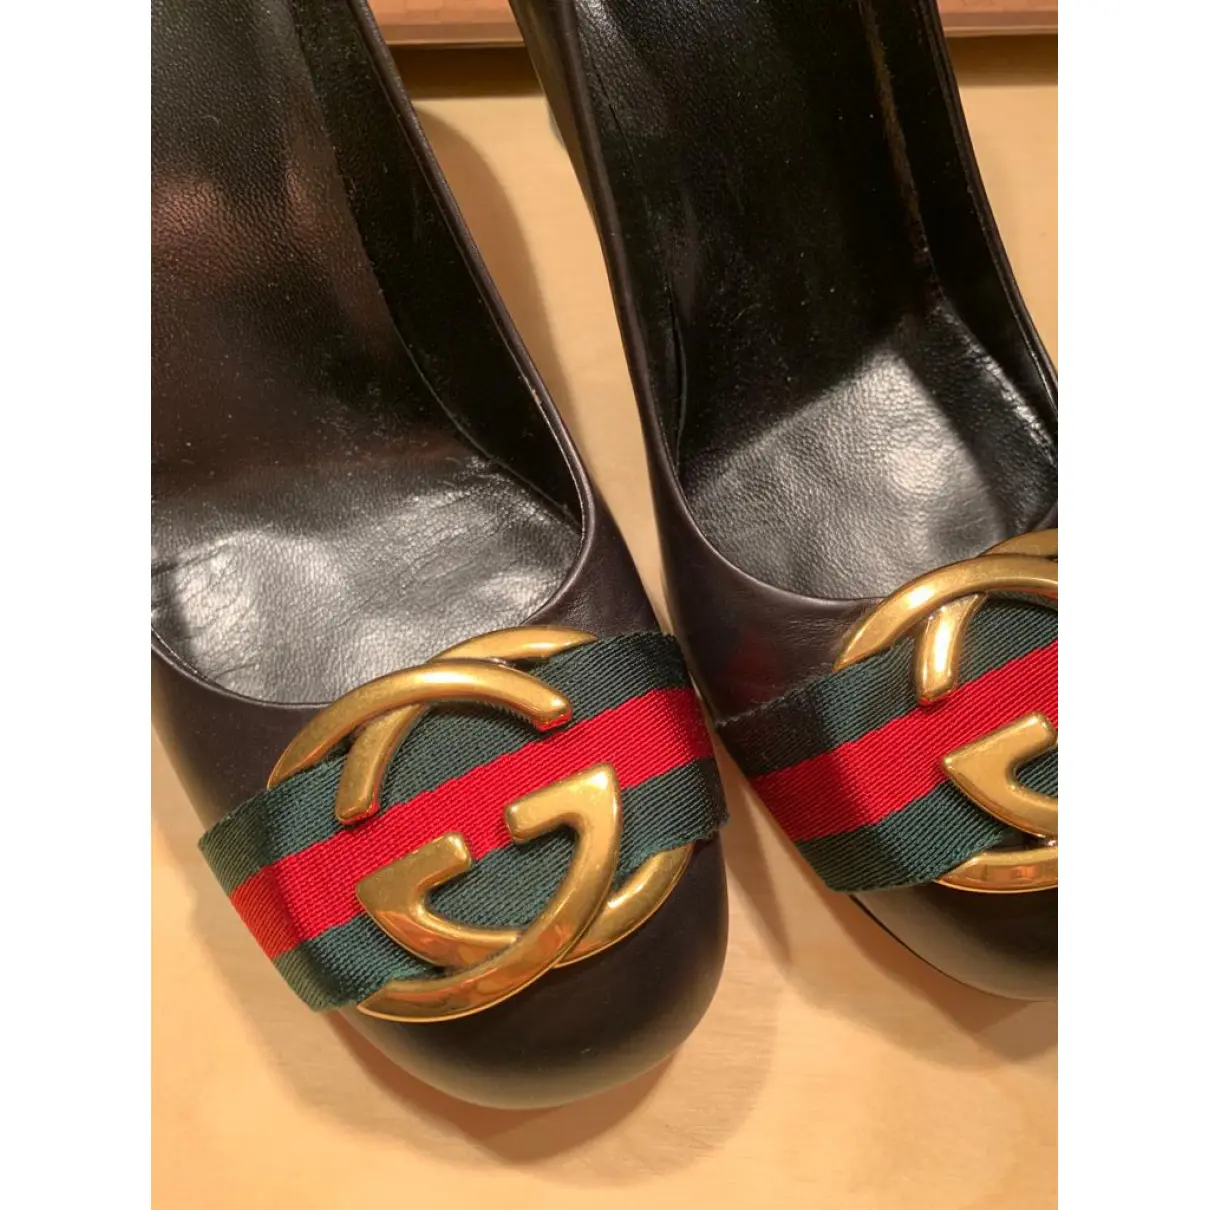 Buy Gucci Marmont leather heels online